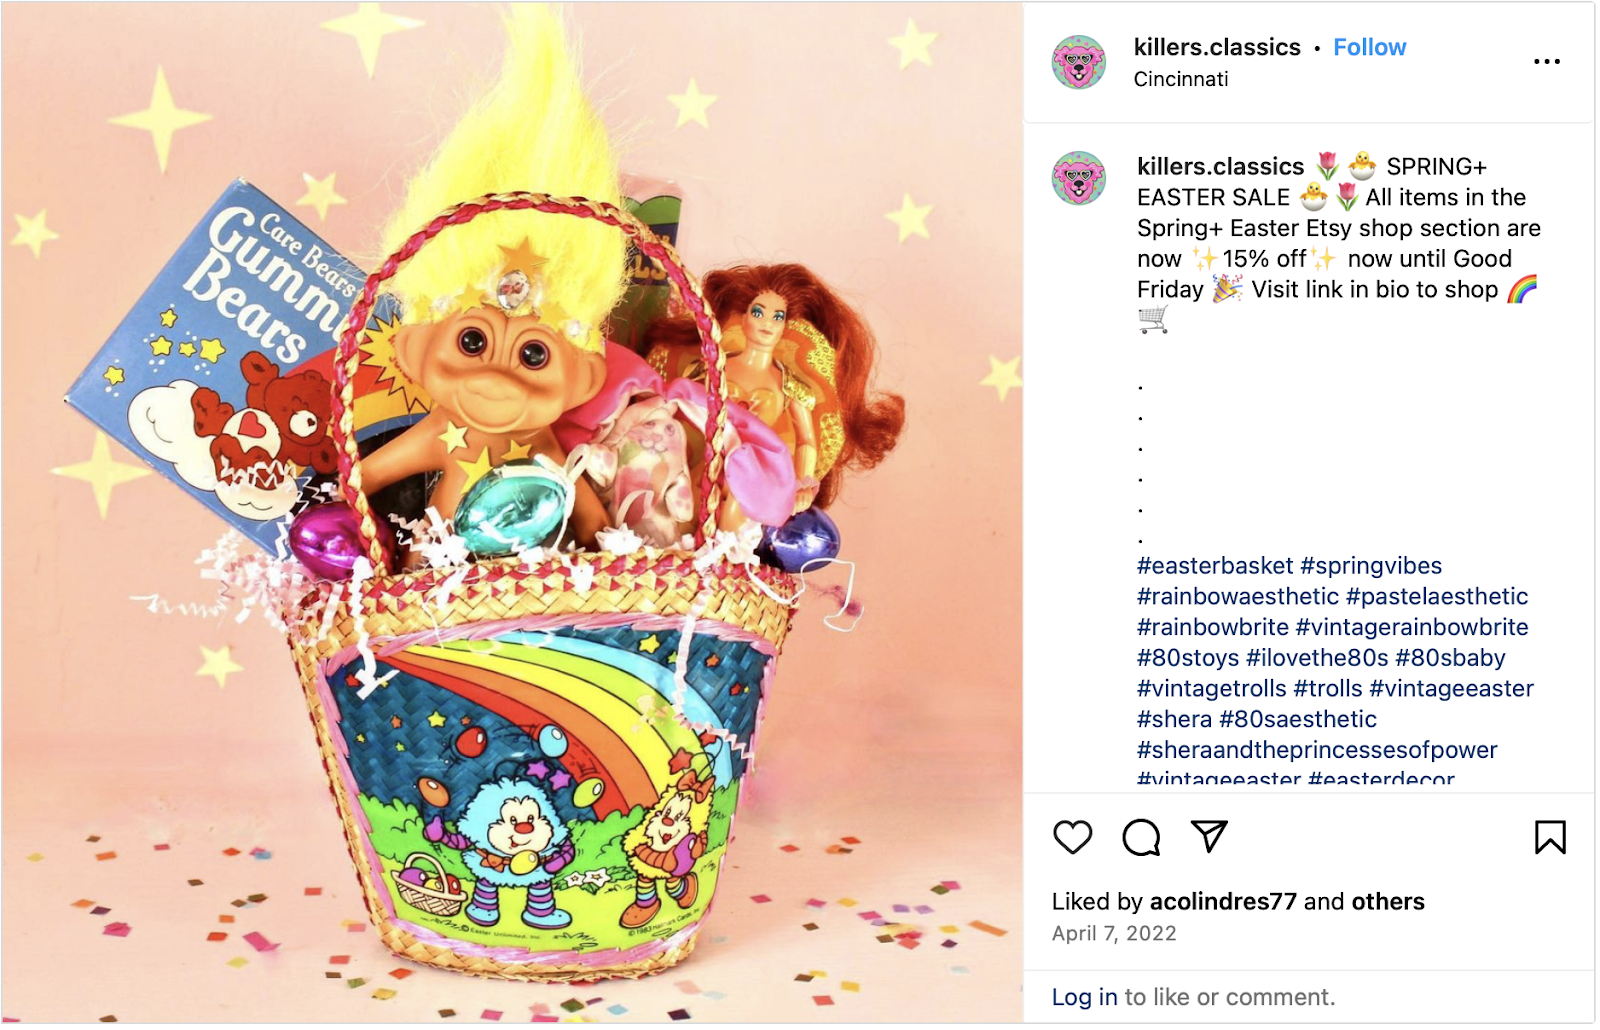 Easter marketing strategy example: Screenshot of Instagram post featuring a nostalgia-themed Easter basket next to the caption "SPRING+EASTER SALE. All items in the Spring+Easter Etsy shop section are now 15% off now until Good Friday. Visit link in bio to shop"